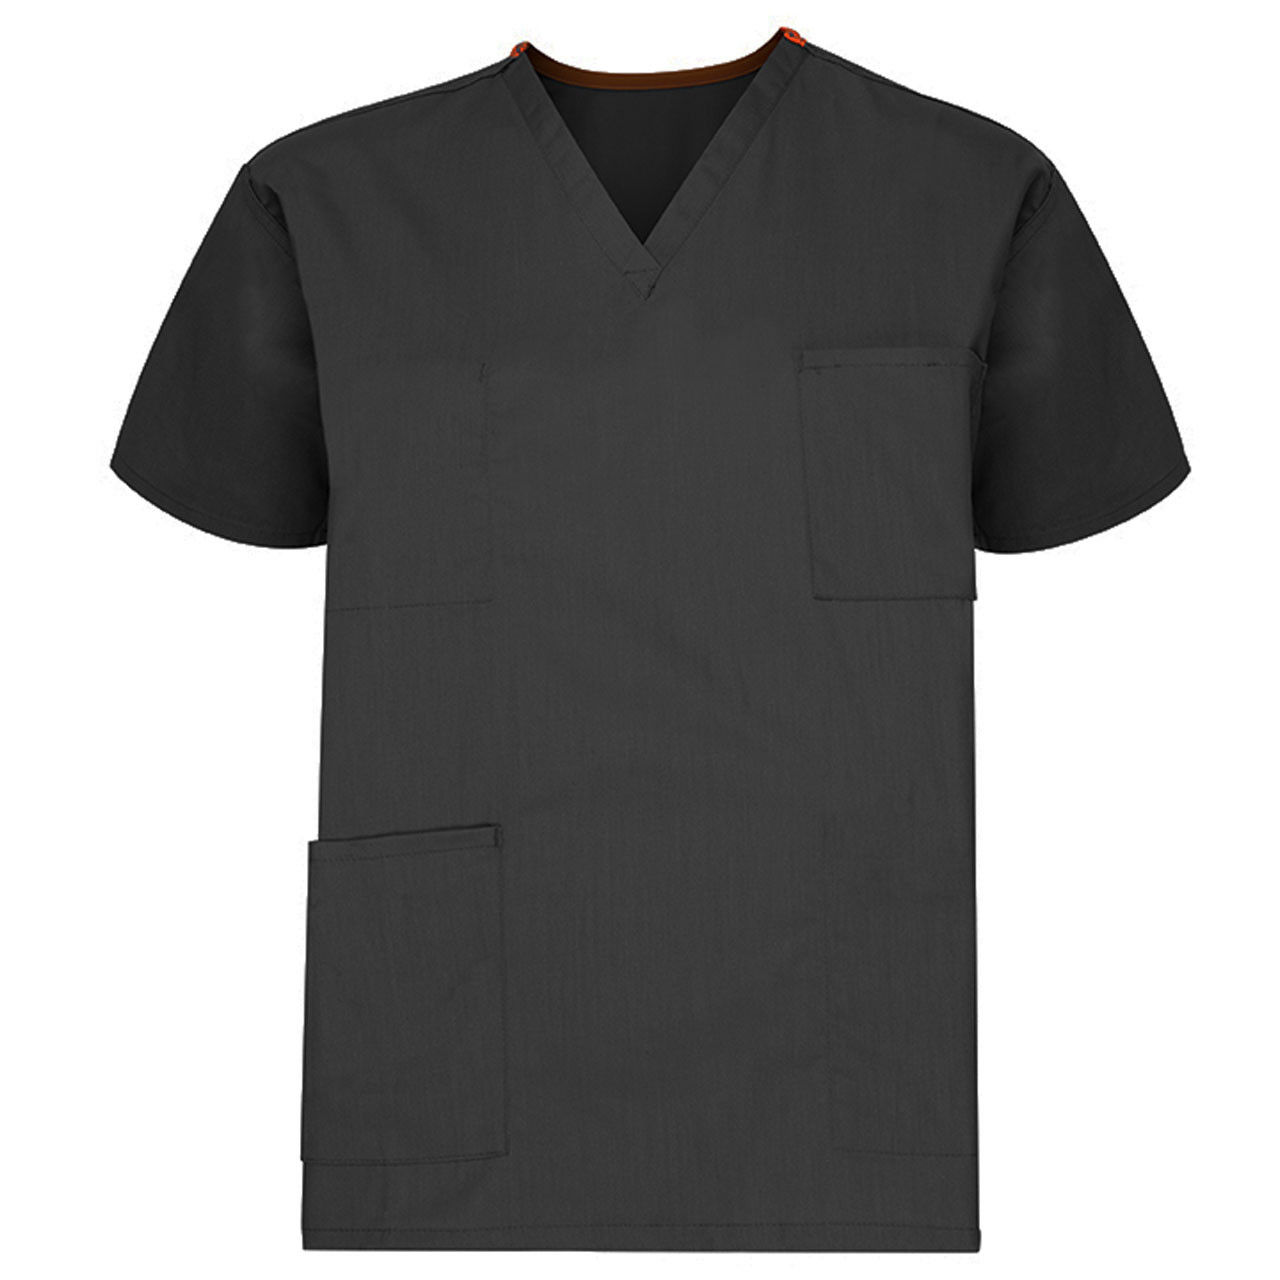 Does a matching pant exist for these reversible scrubs, Unisex Reversible Scrub Top, Black?